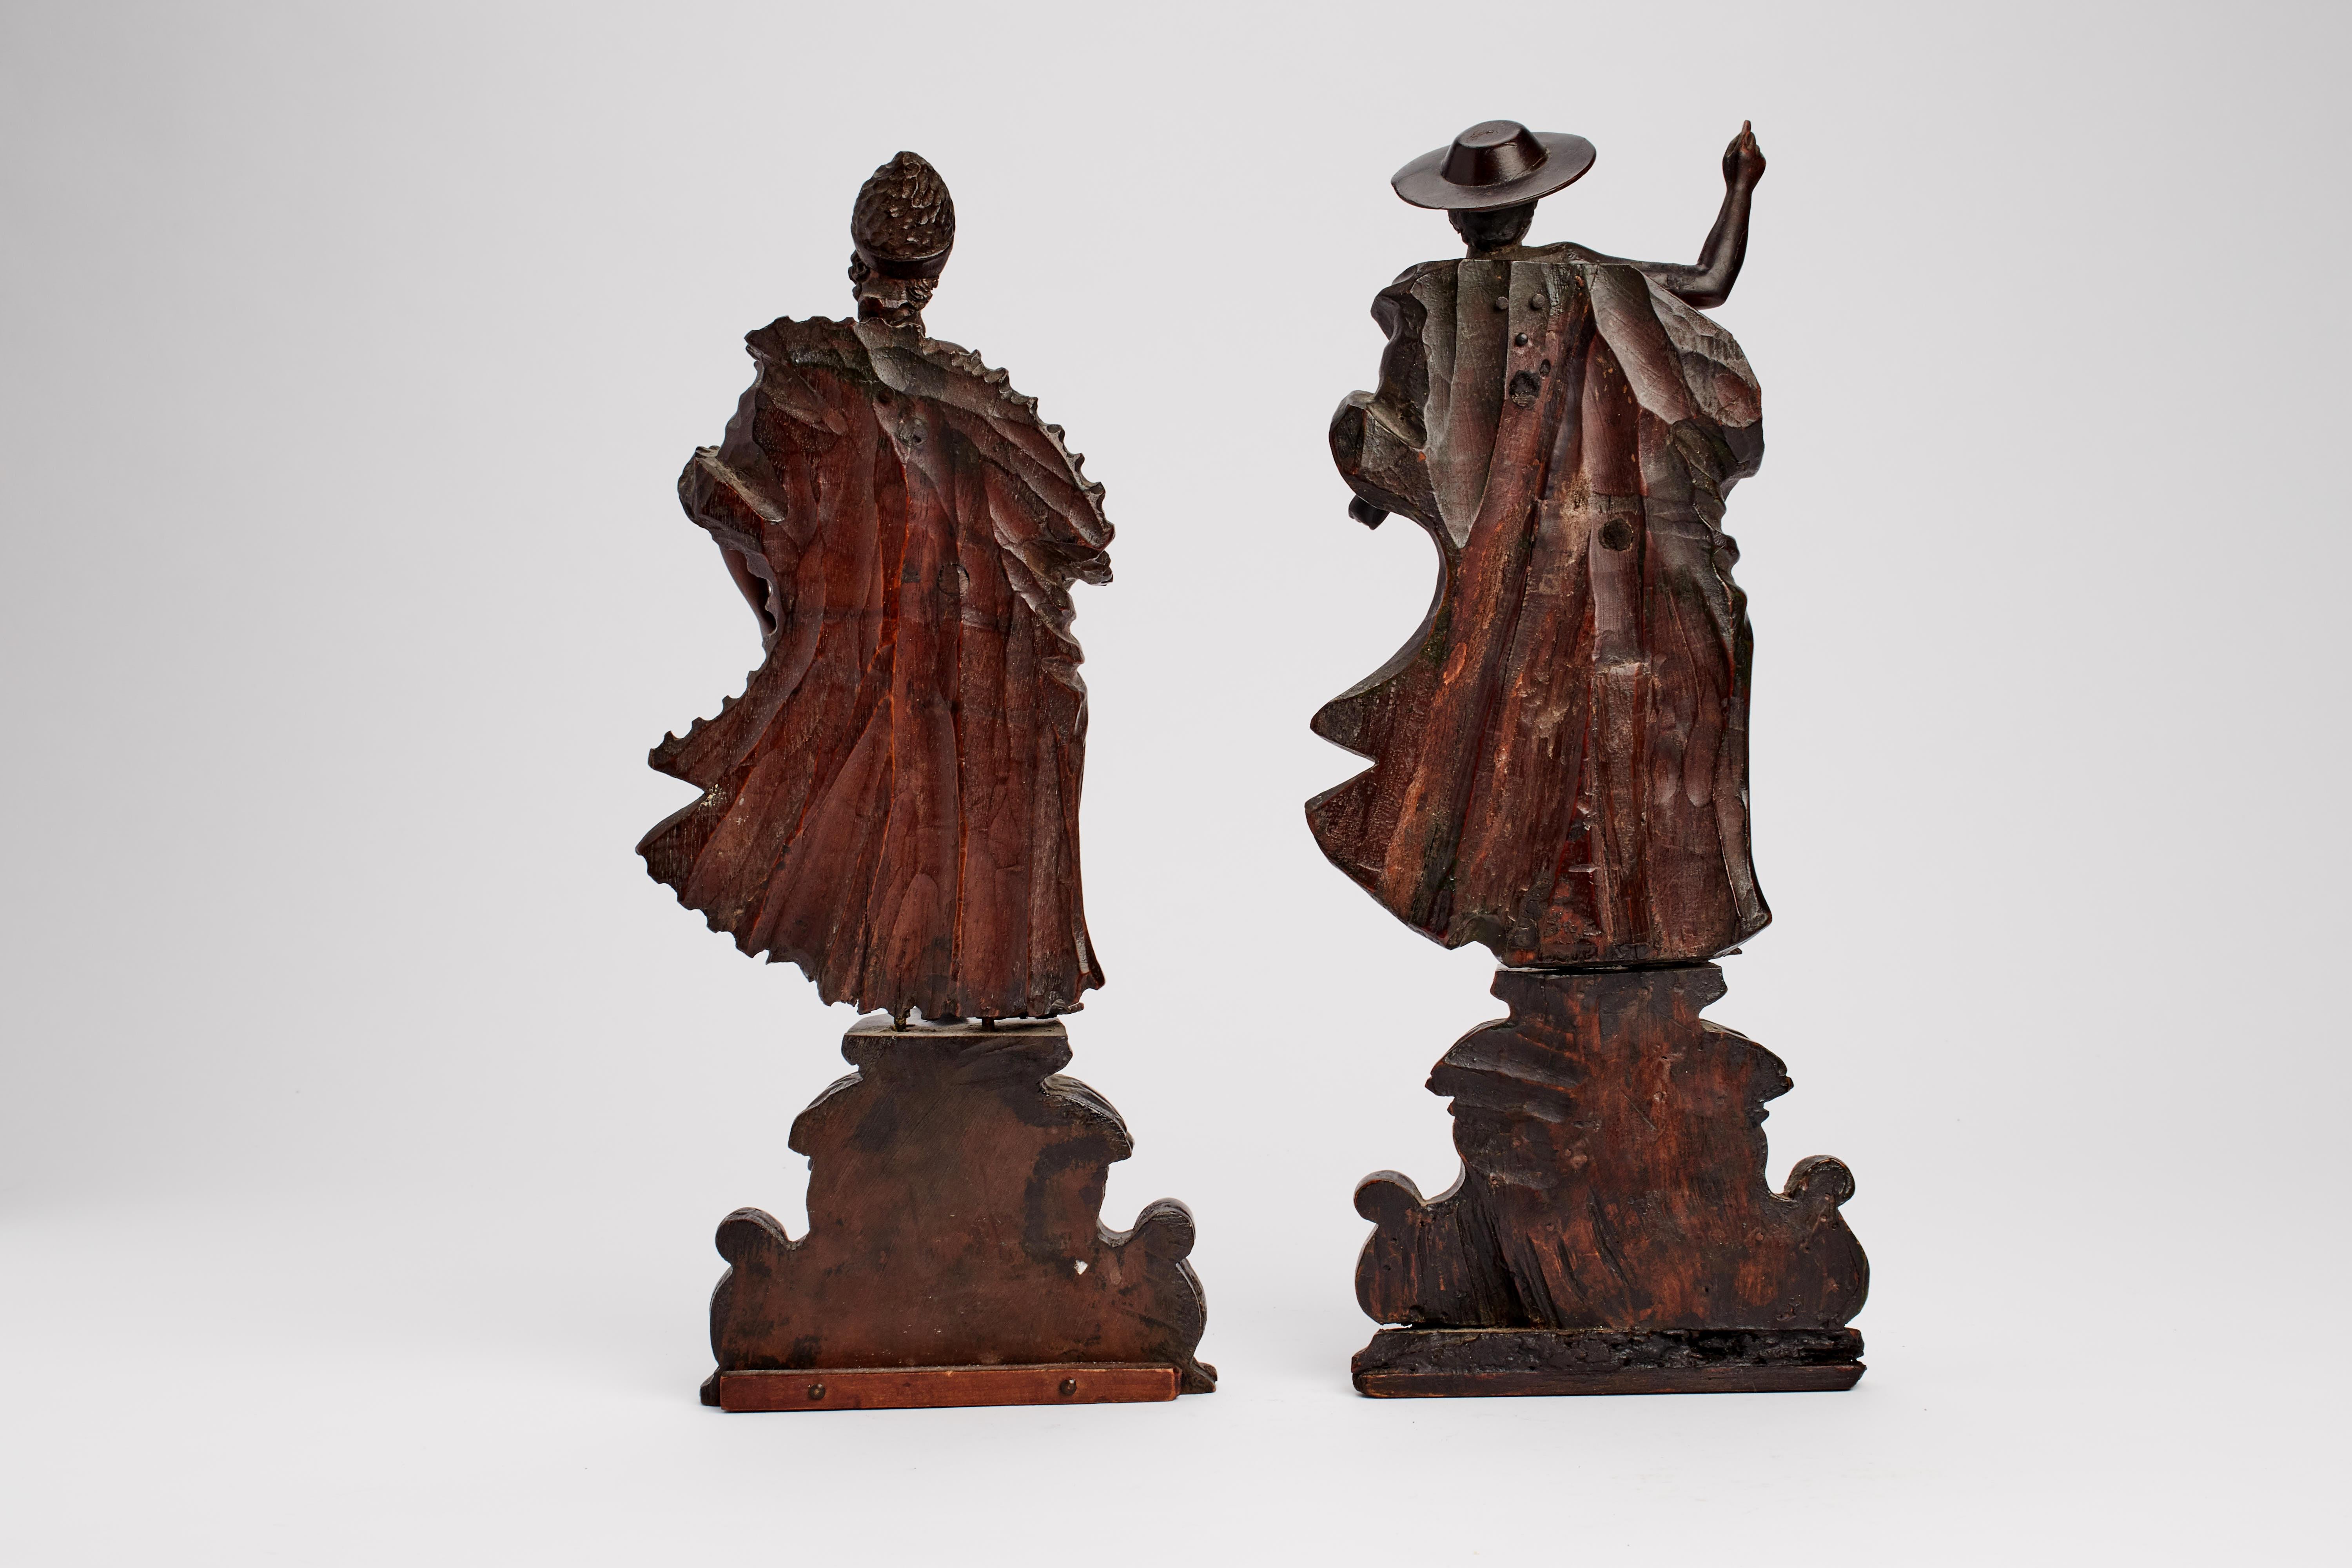 Over a late baroque richly sculpted and engraved base with a cartouche over the front, the moved figures partially covered with wide fur and drape, depicting a bishop and a cardinal. Swiss pine wood. Venice 1730 ca.